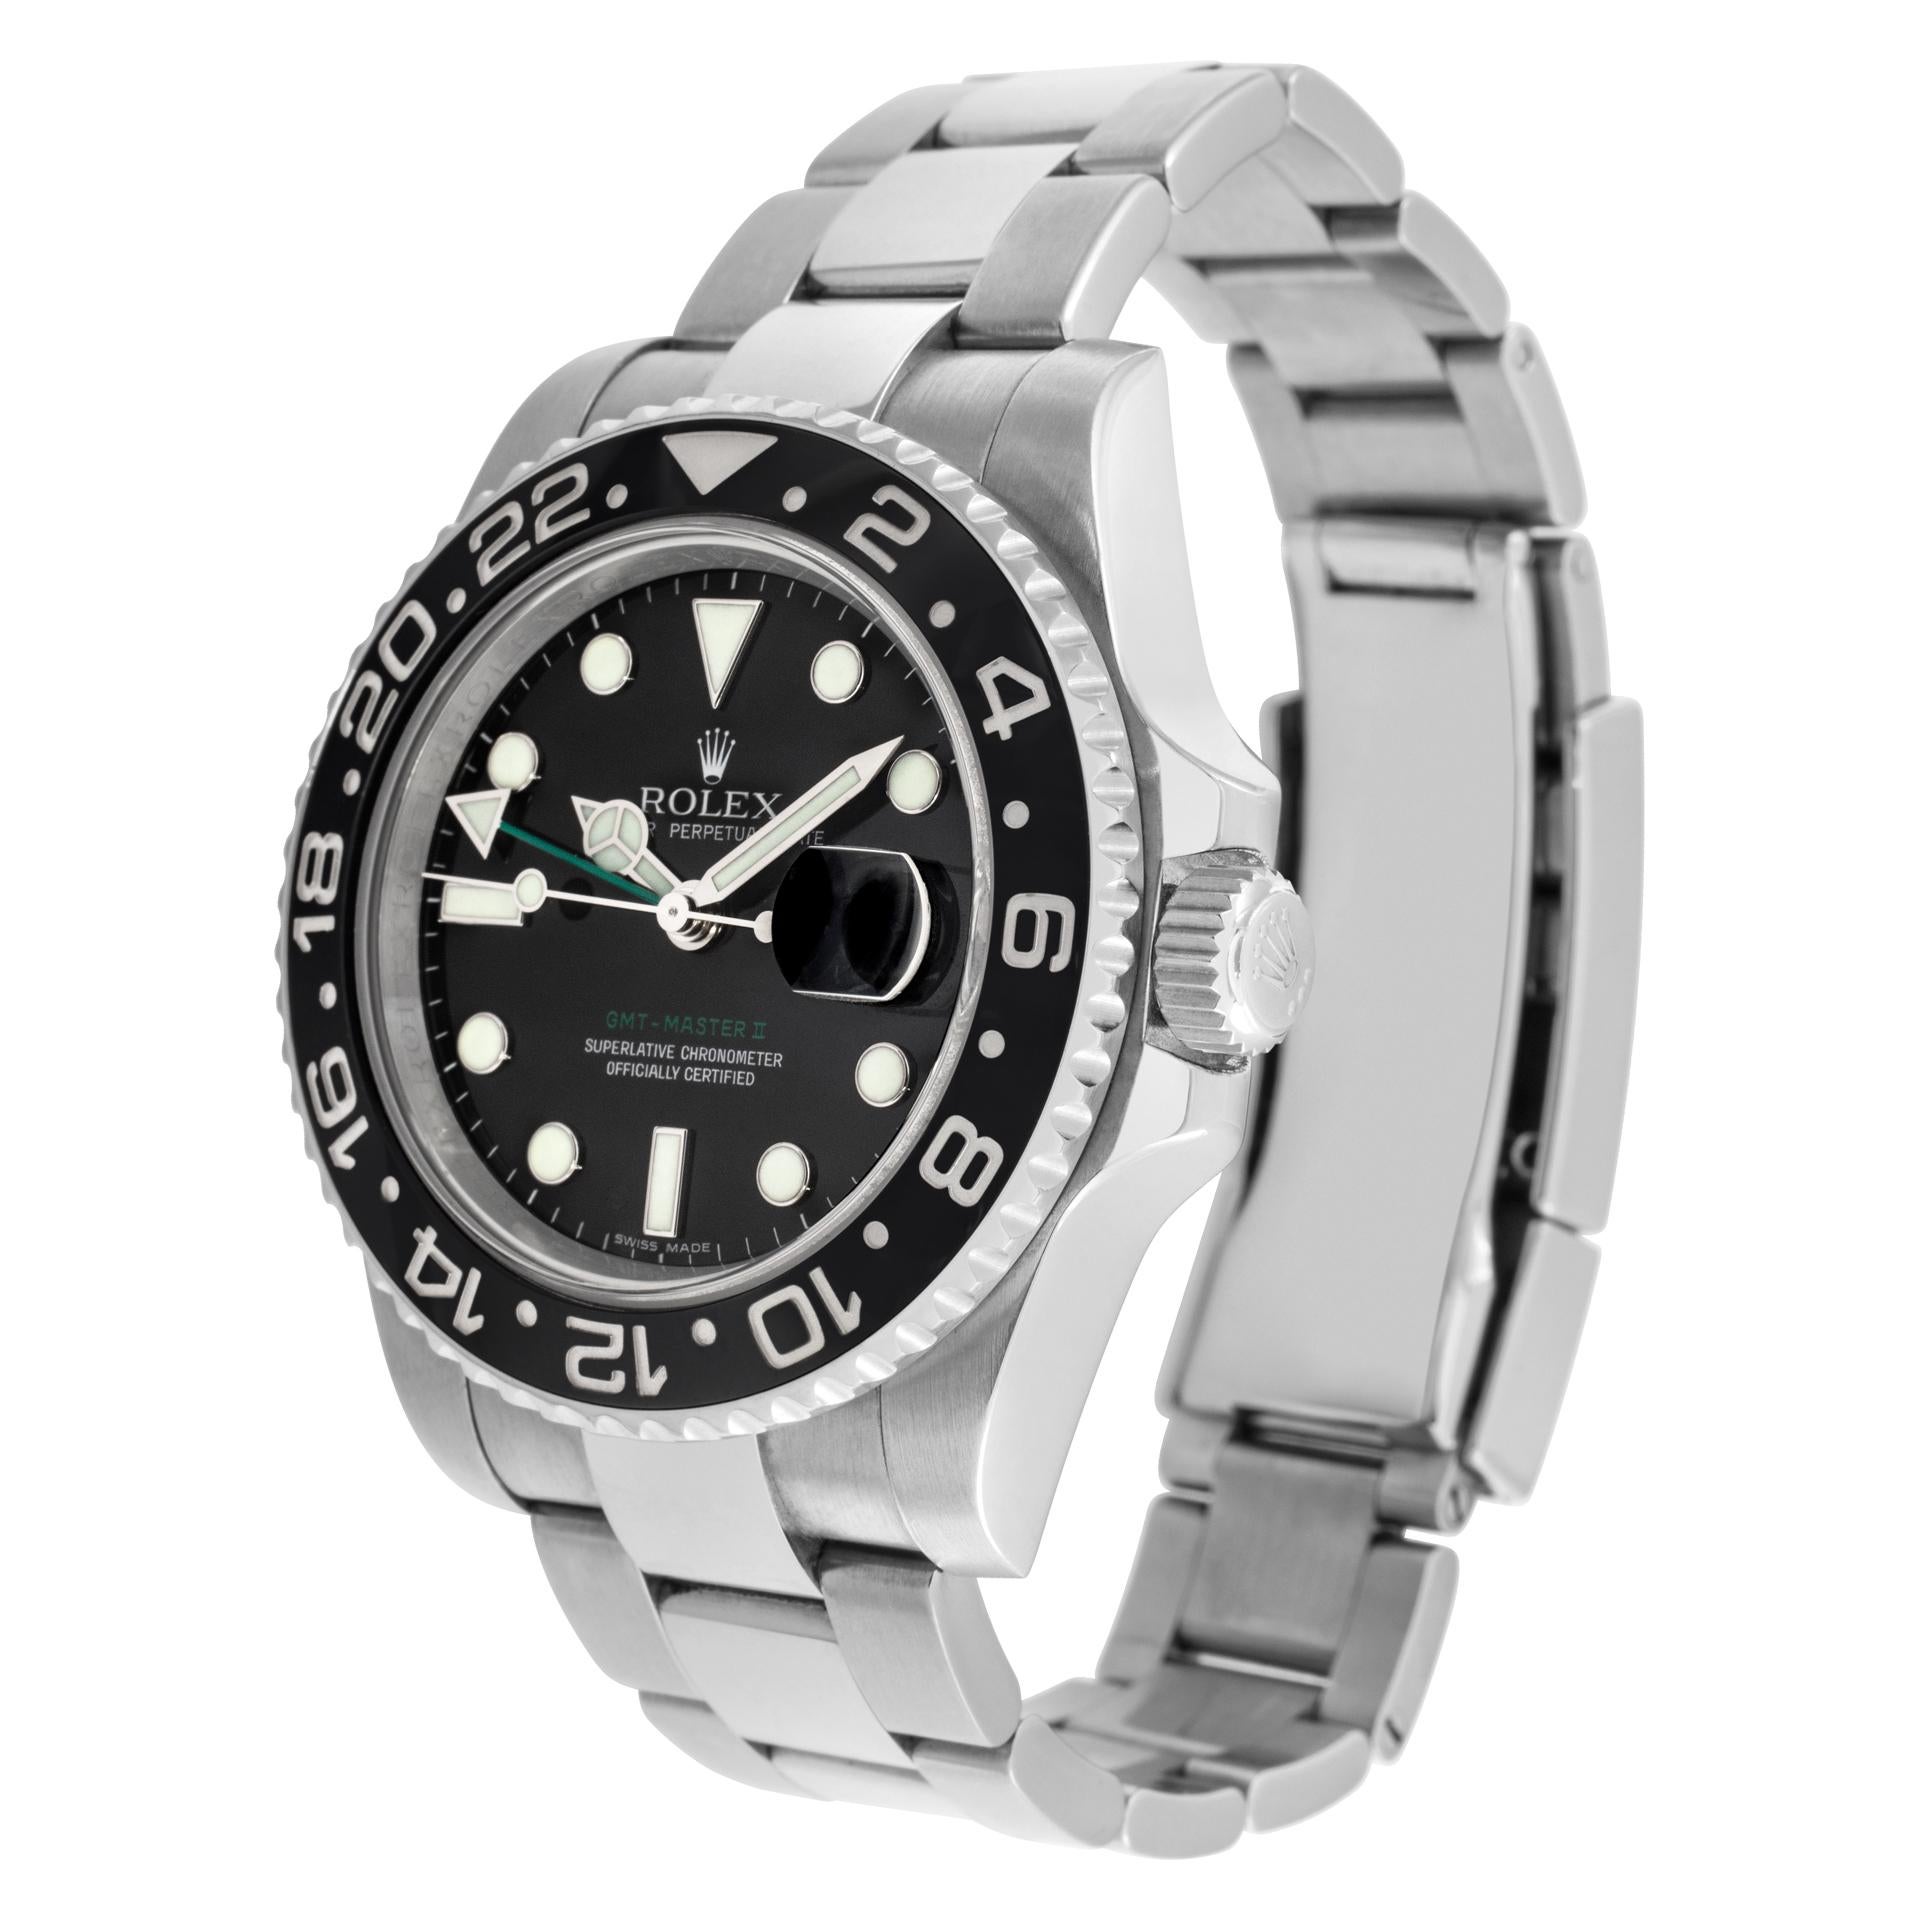 Rolex GMT-Master II in stainless steel with ceramic bezel. Auto w/ sweep seconds, date and dual time. 40 mm case size. Ref 116710. Circa 2009. **Bank Wire Only at this Price** Fine Pre-owned Rolex Watch. Certified preowned Sport Rolex GMT-Master II